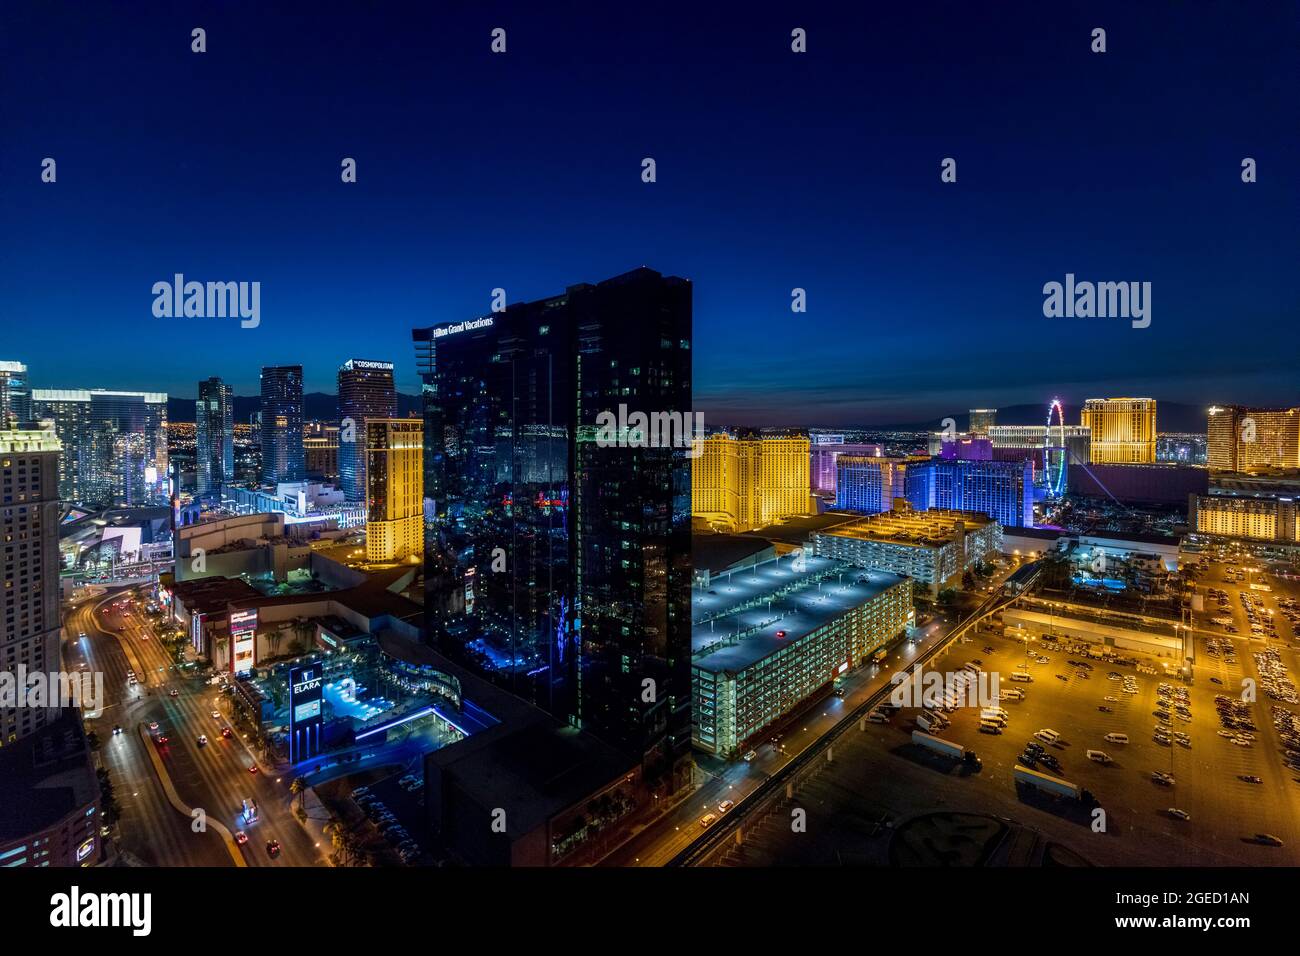 Elevated view of The Strip, Las Vegas, Nevada, USA. Hilton Grand Vacations Hotel and Casino in the centre. Night photography. Stock Photo